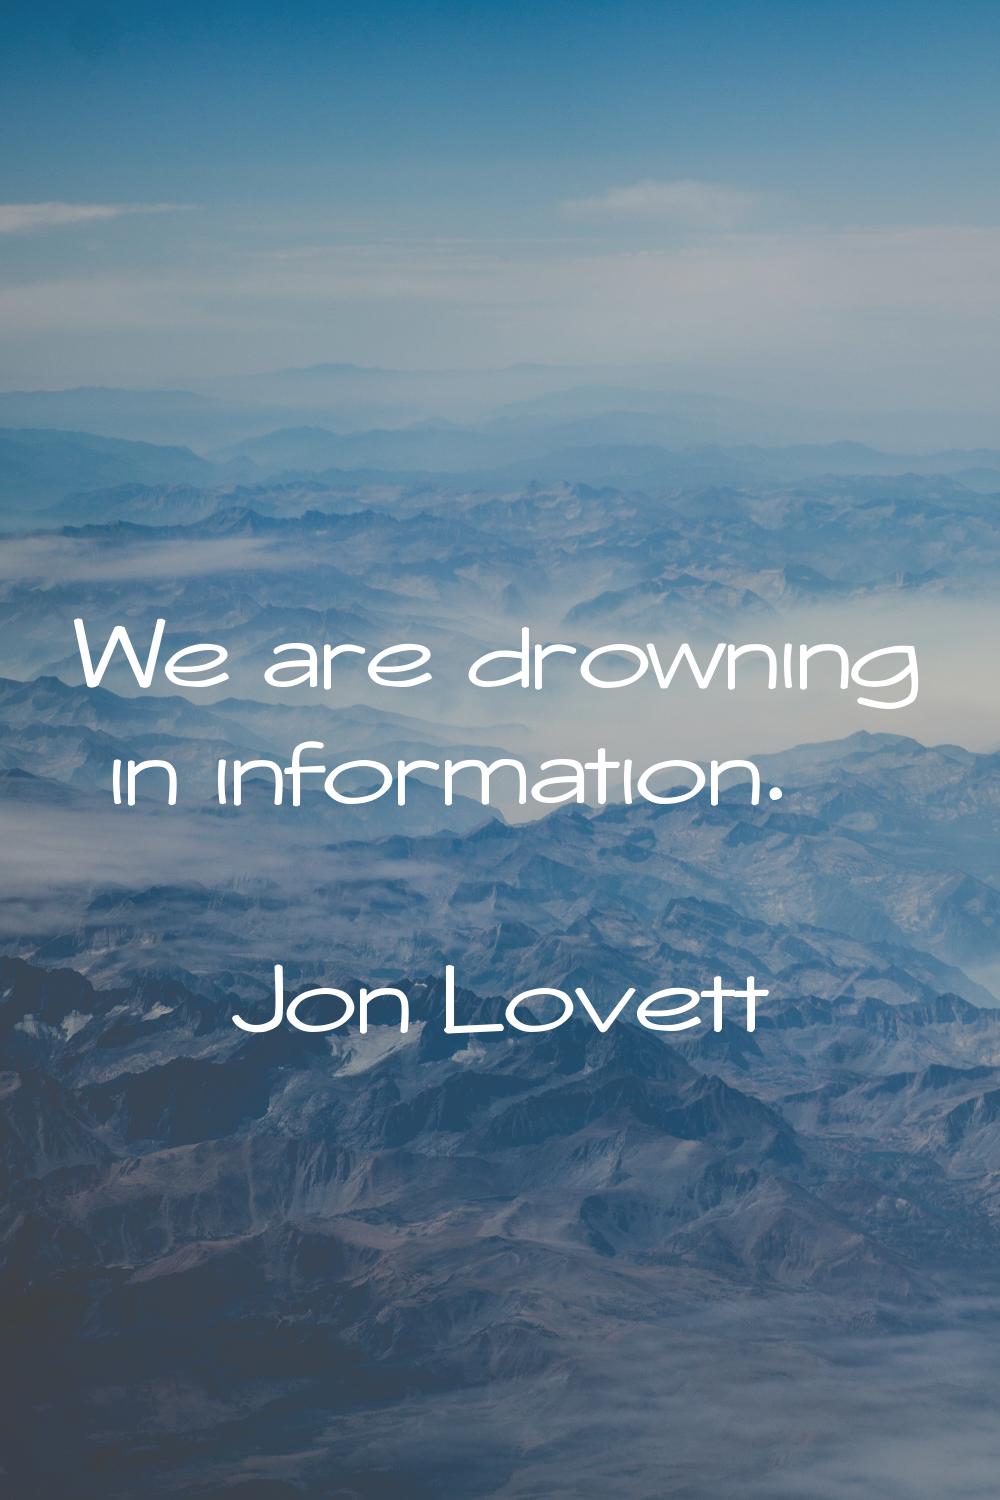 We are drowning in information.